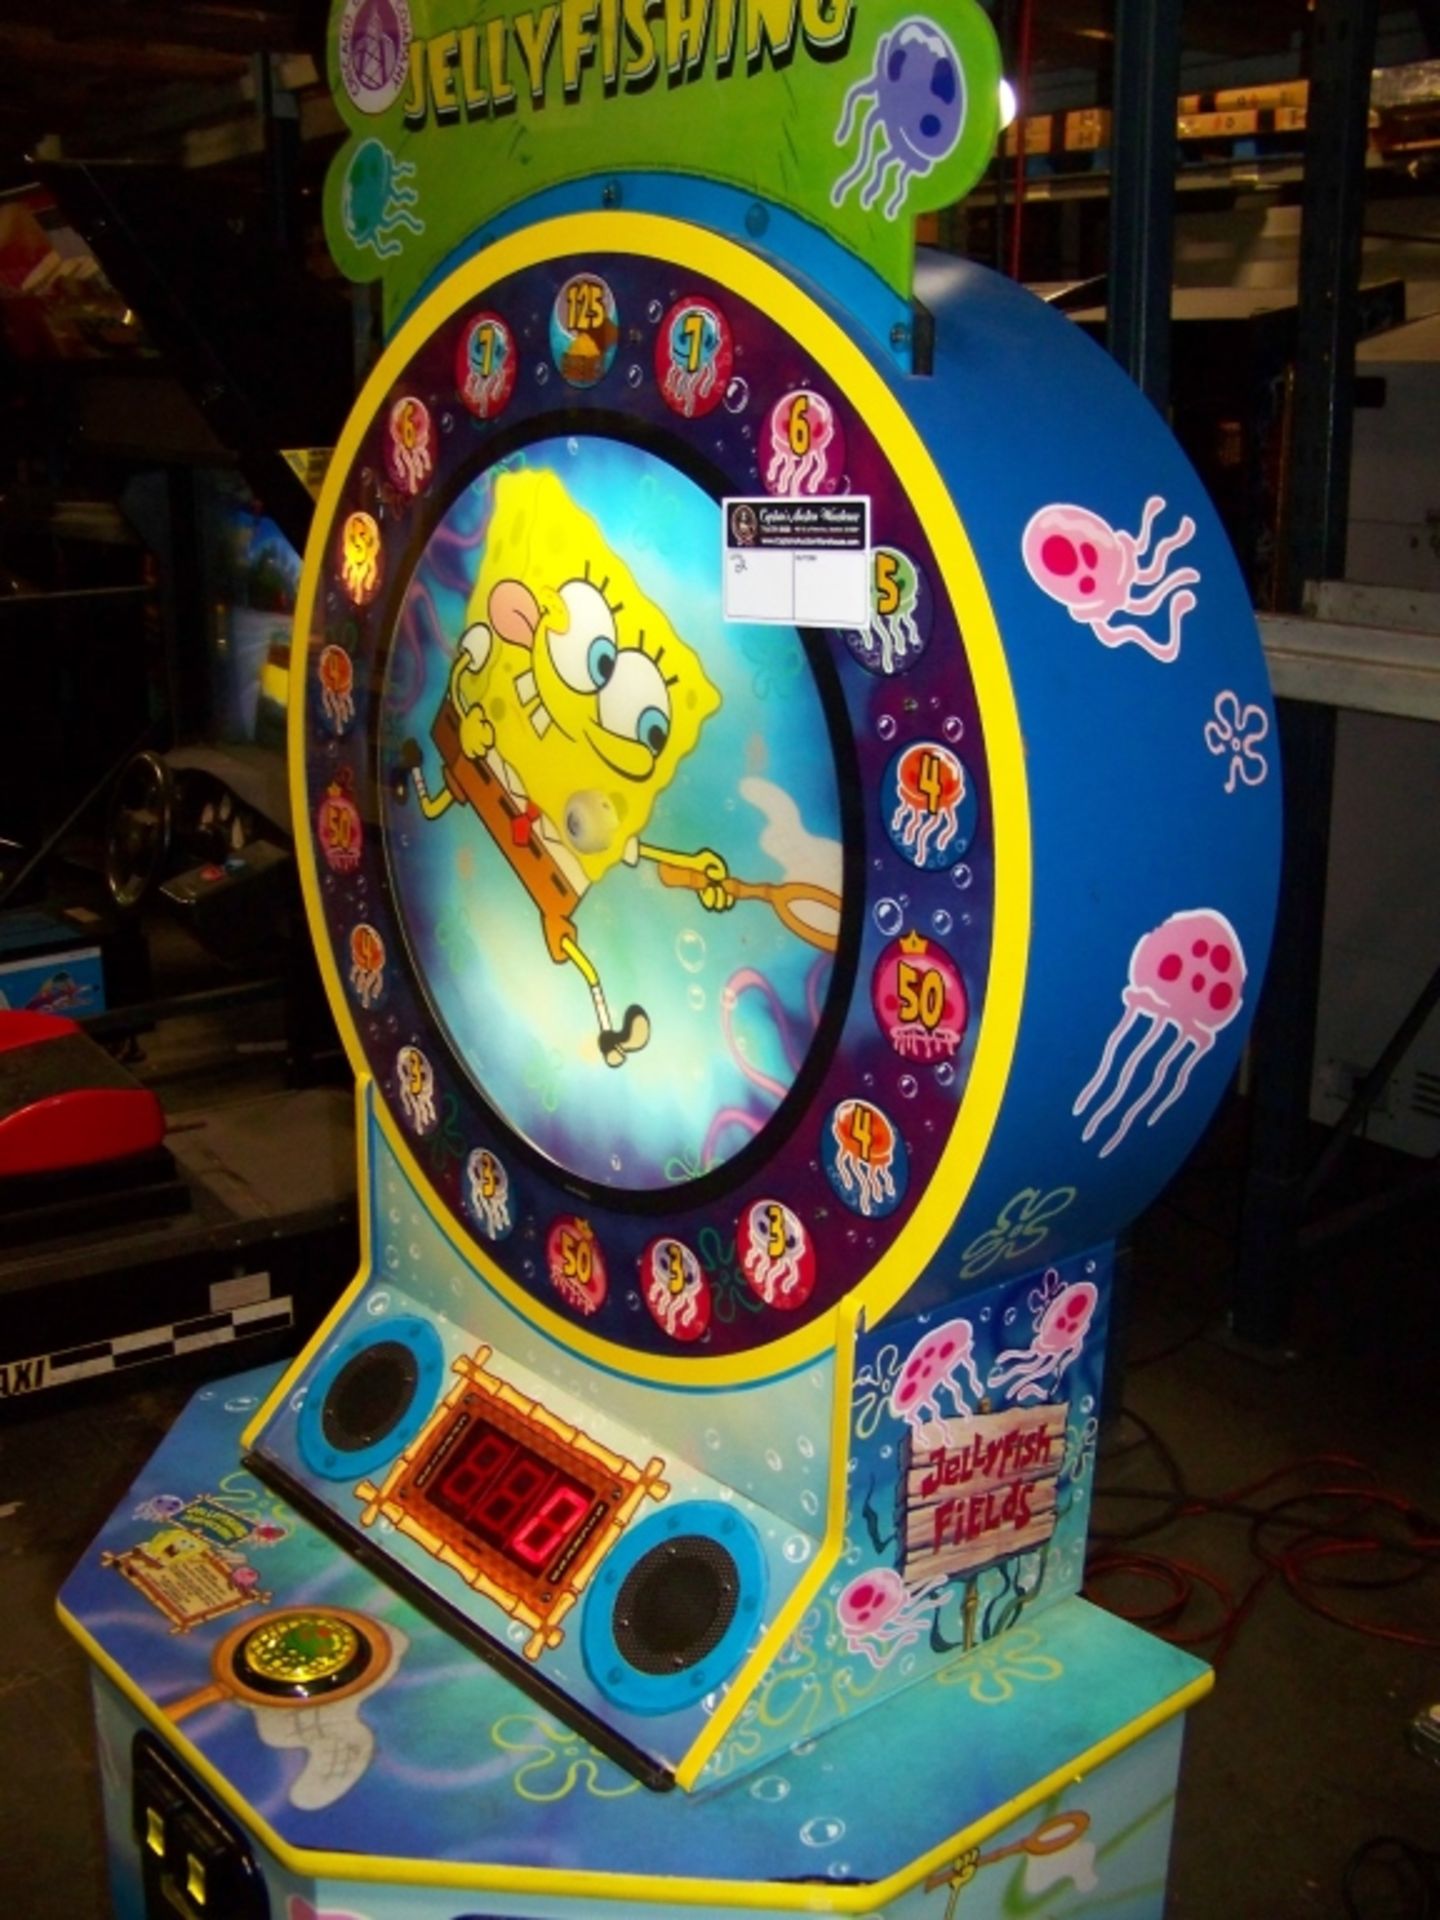 SPONGE BOB JELLY FISHING TICKET REDEMPTION GAME - Image 6 of 6